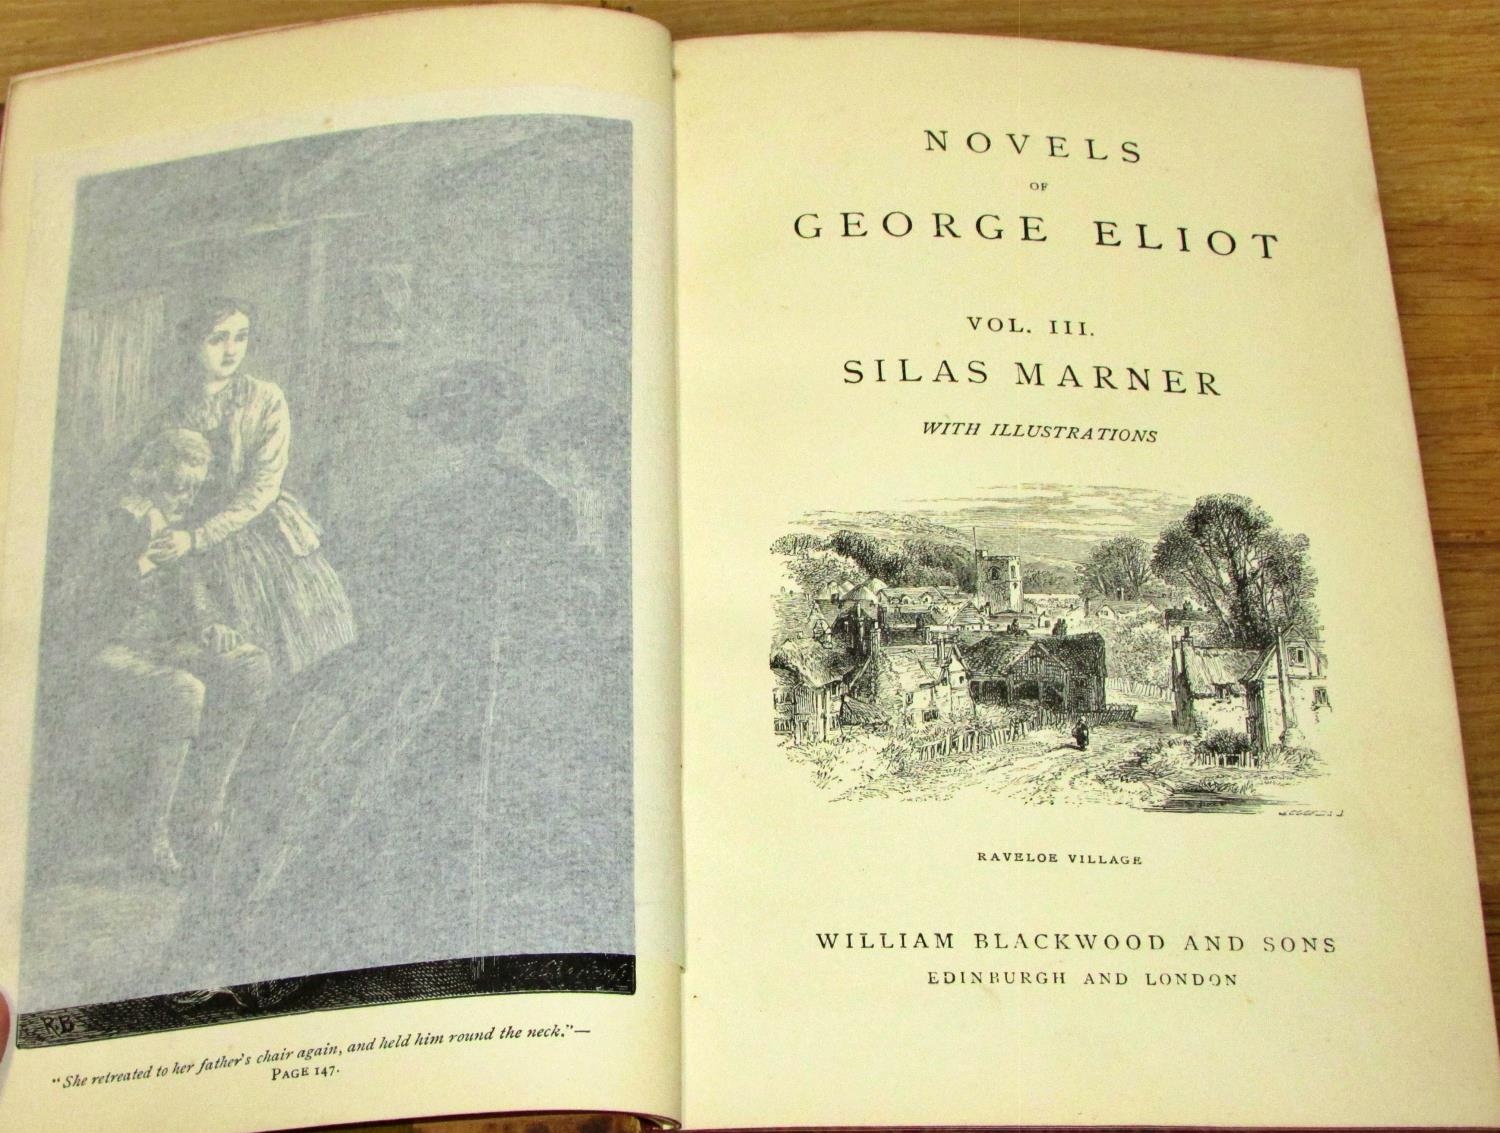 Six leatherbound novels by George Eliot - Silas Marner, Romola, Mill on the Floss, Daniel Deronda, - Image 2 of 3